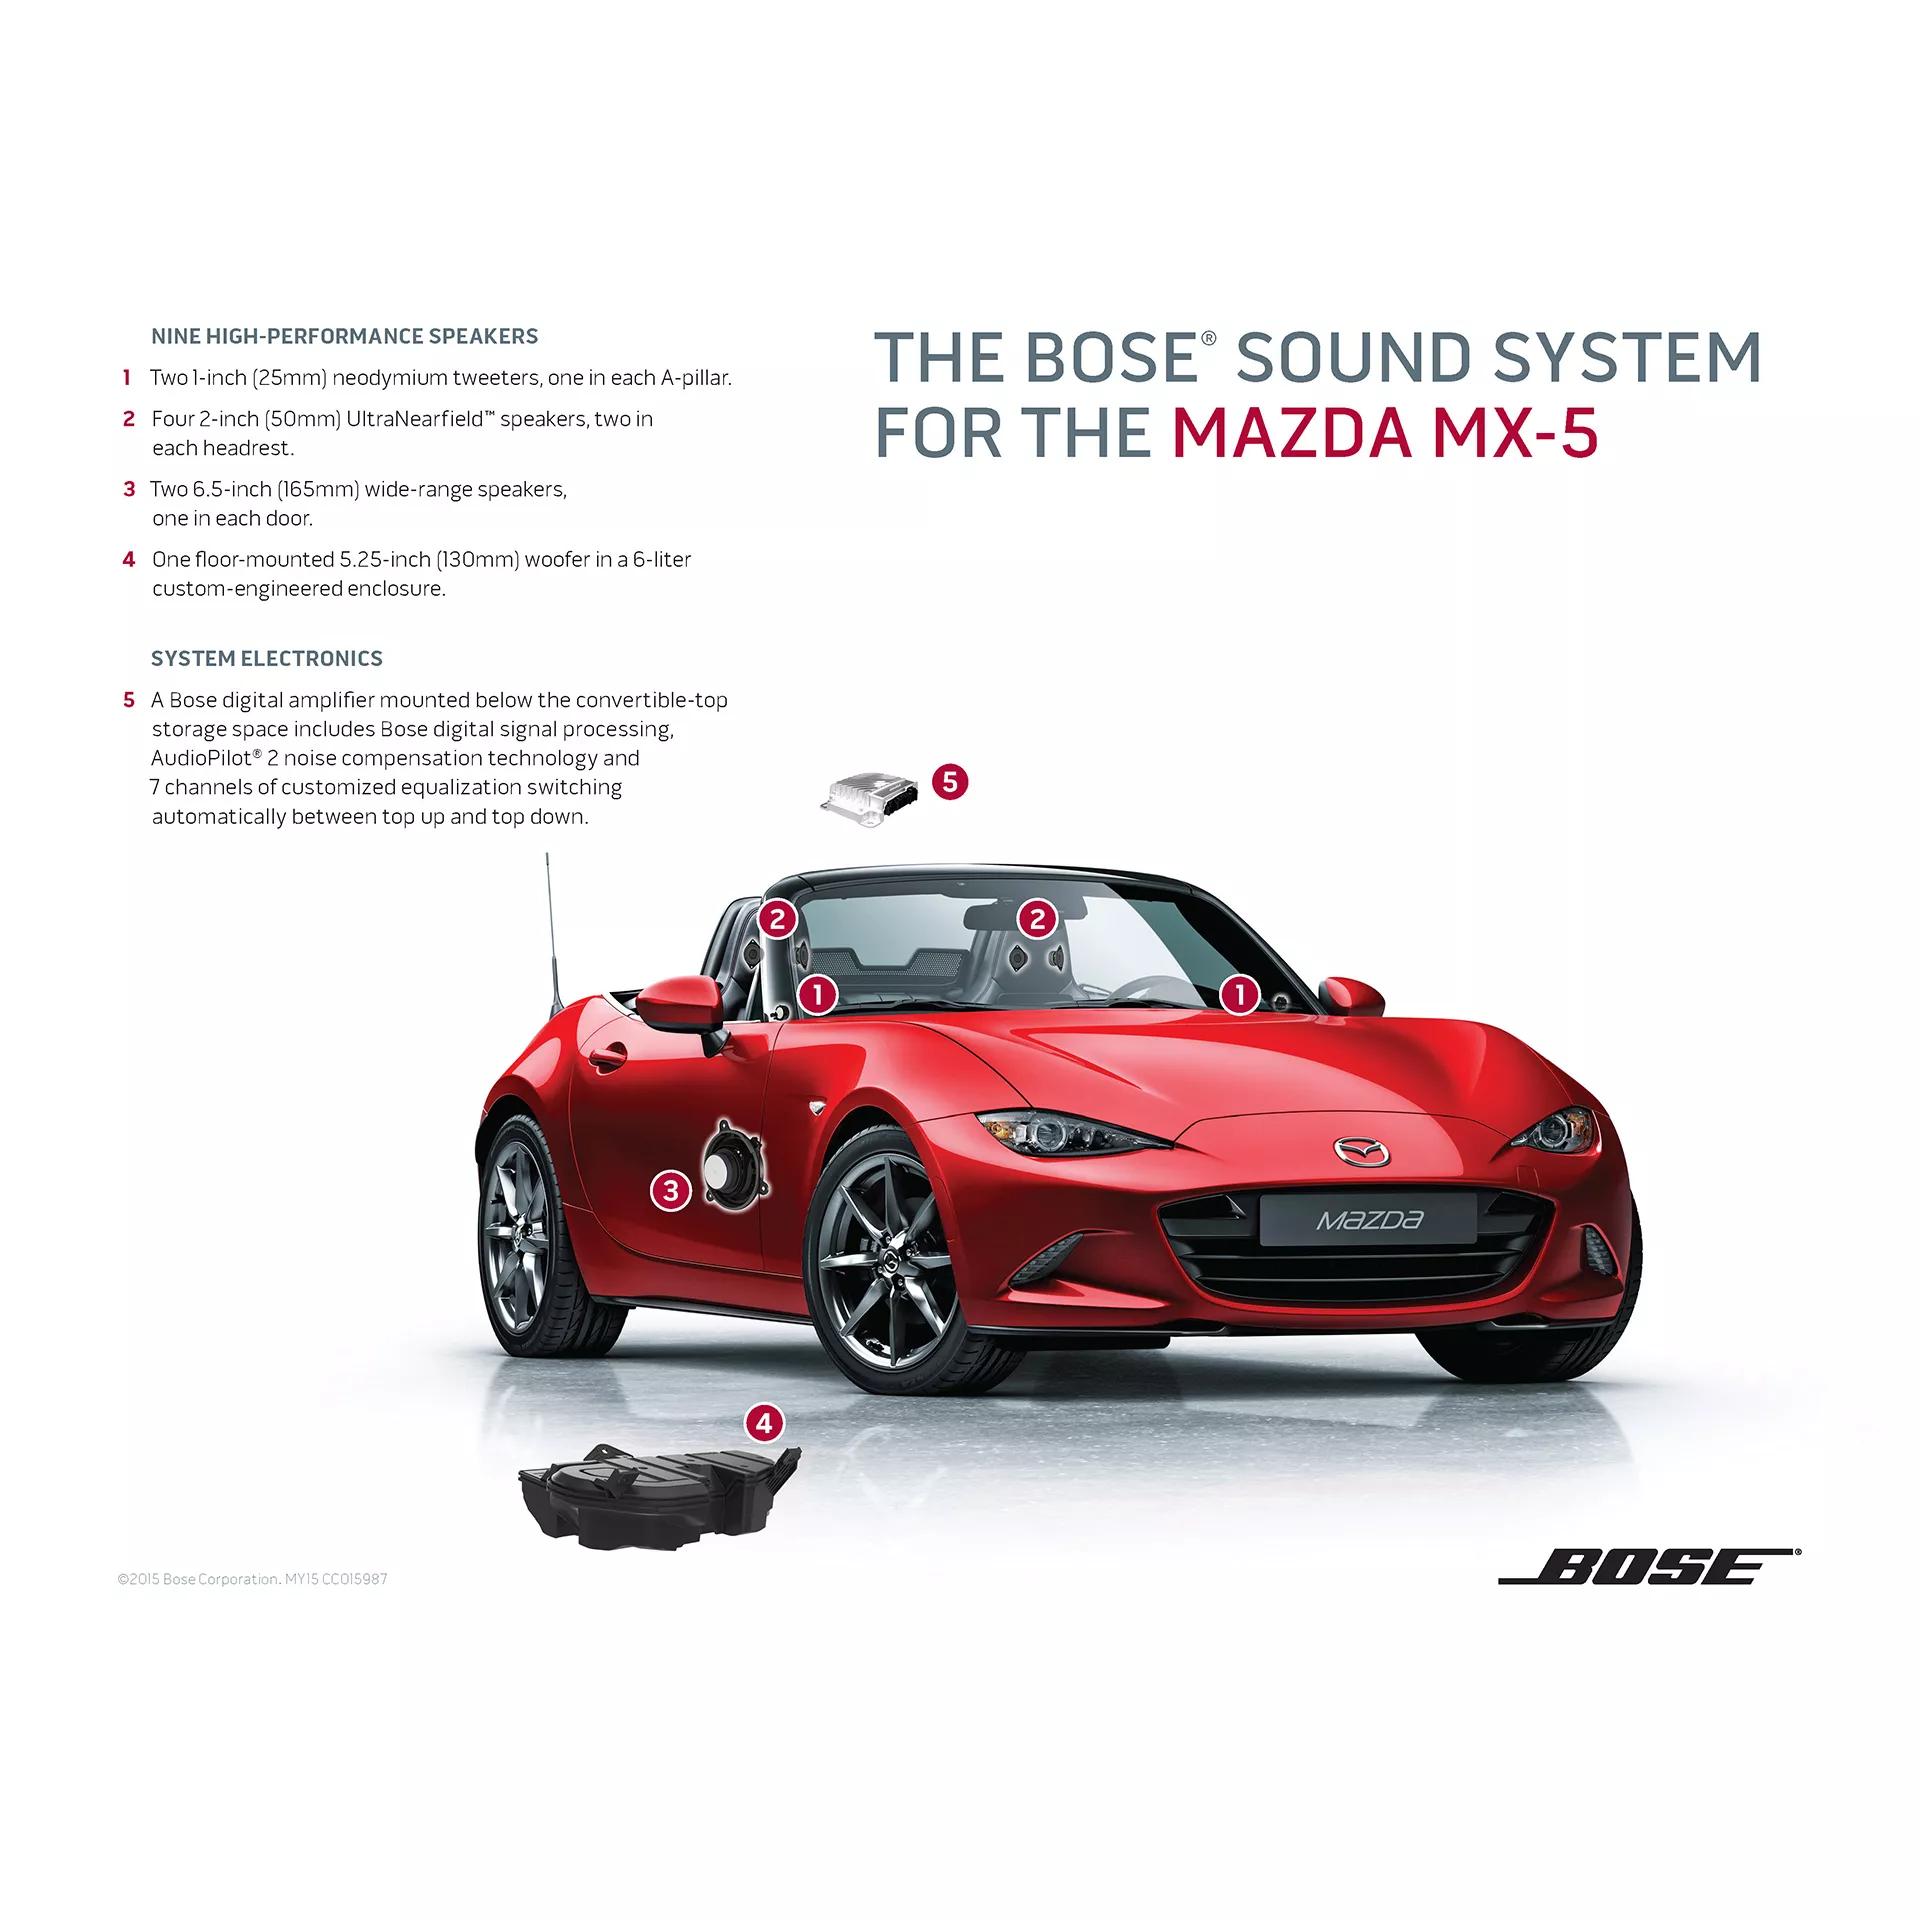 Bose sound system parts for the 2016 Mazda MX-5